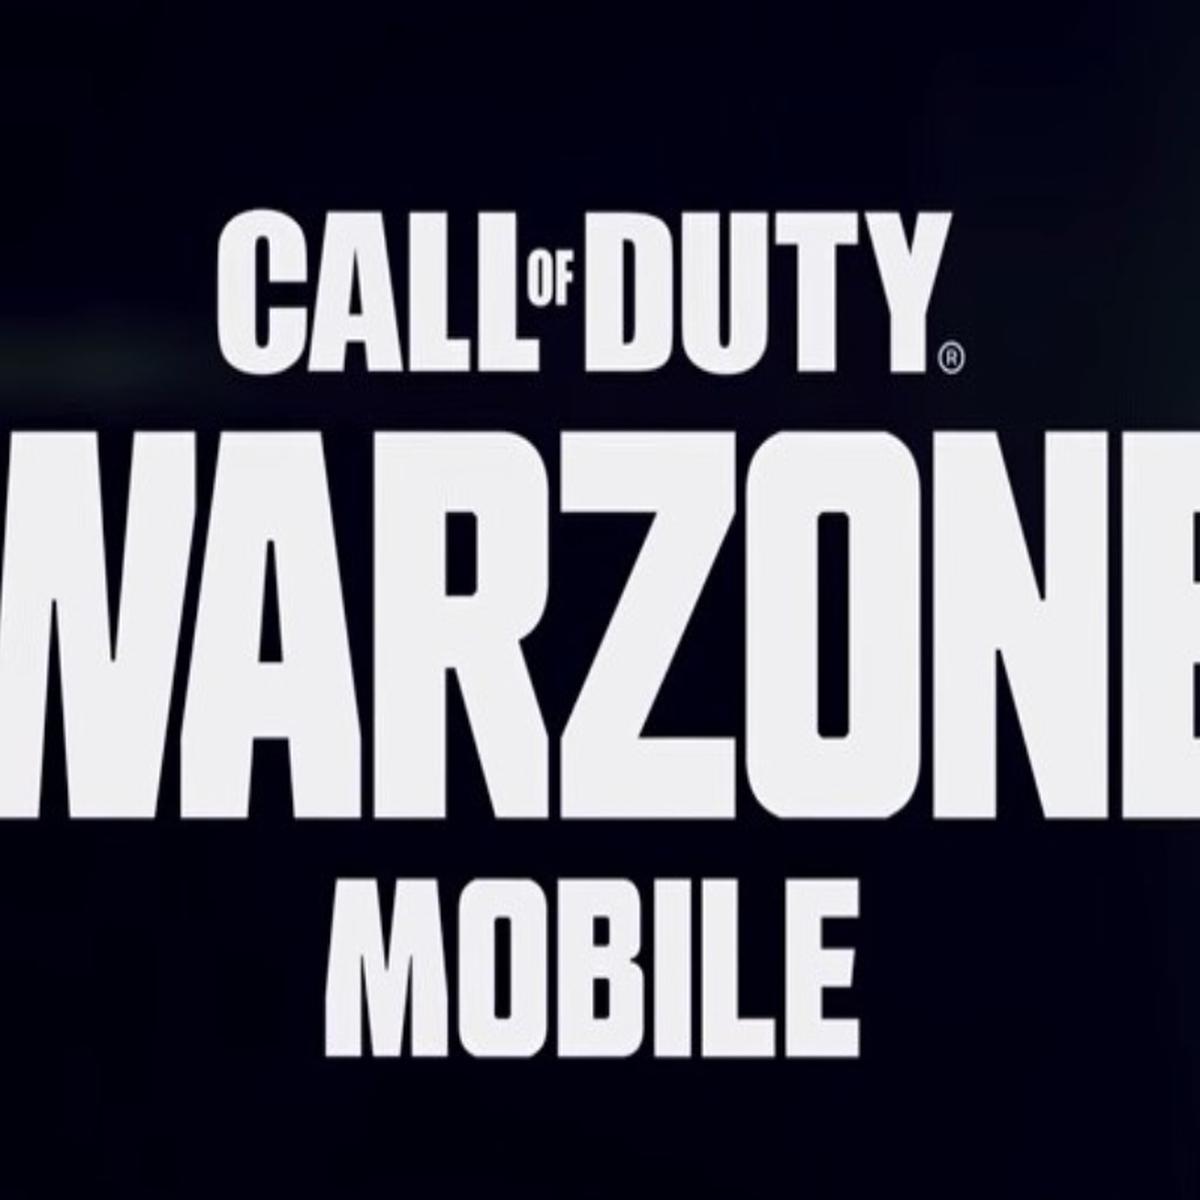 warzone mobile CODM Download on MediaFire